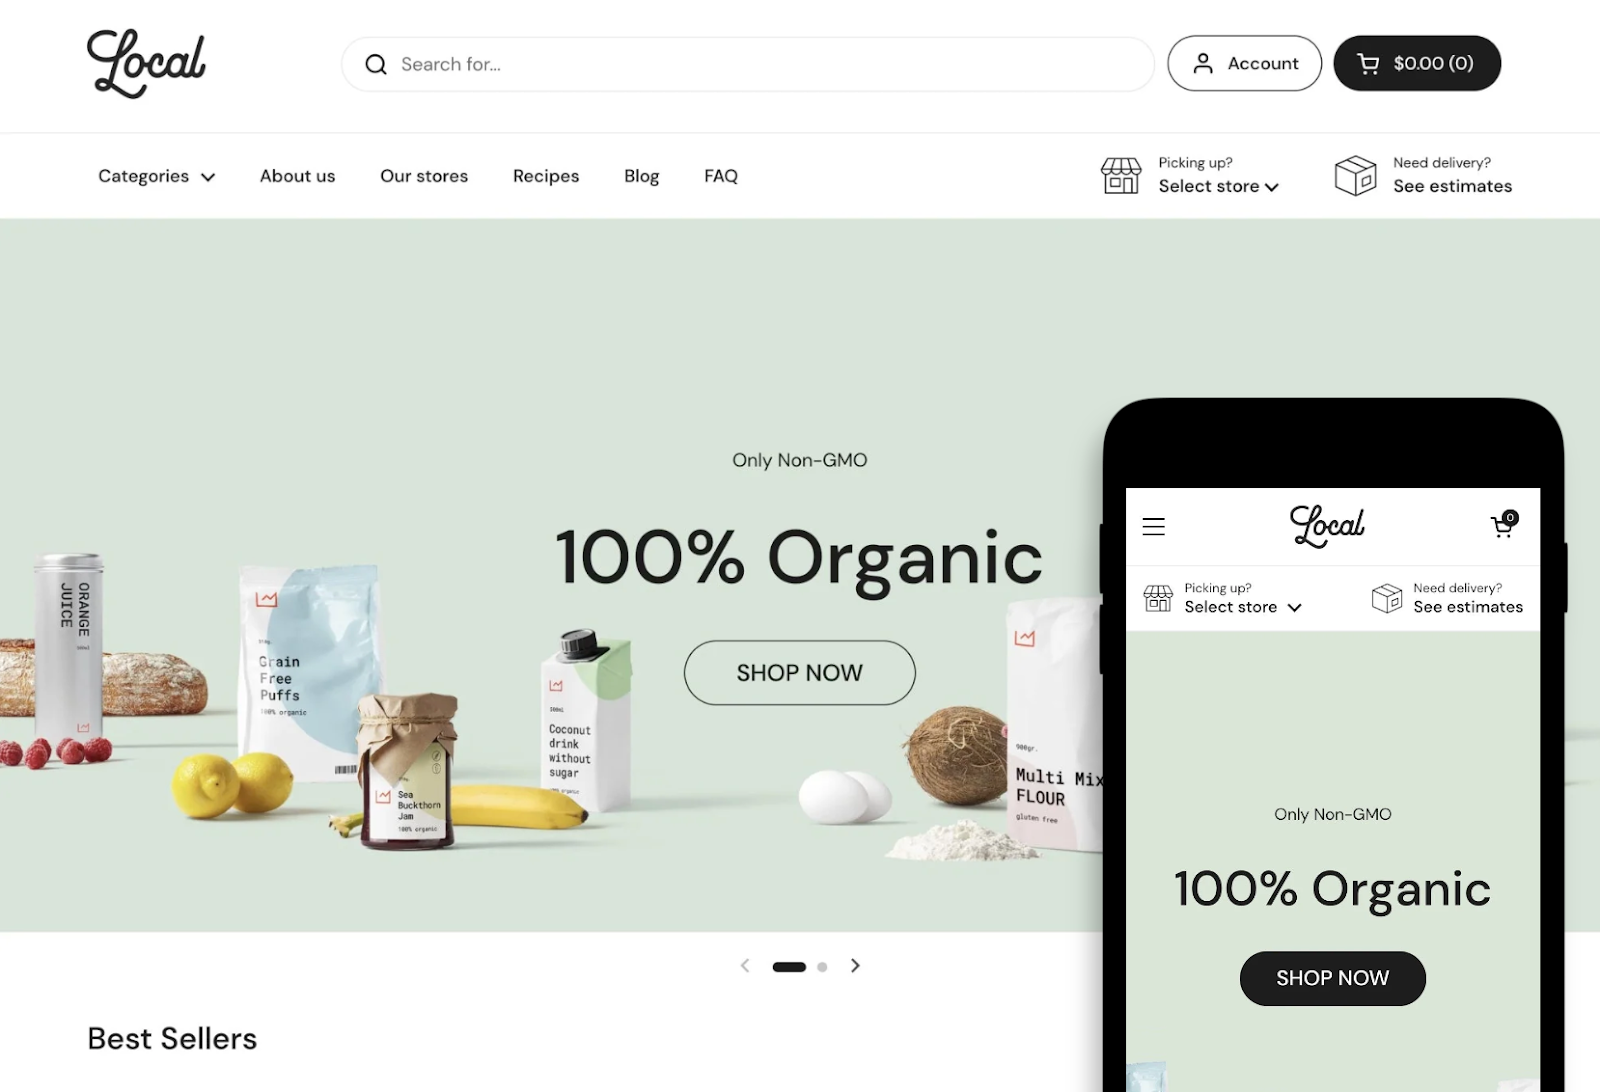 Many brands choose Shopify themes to optimize the interface and information provided to customers, making it one of the best eCommerce solutions - Image source: Shopify